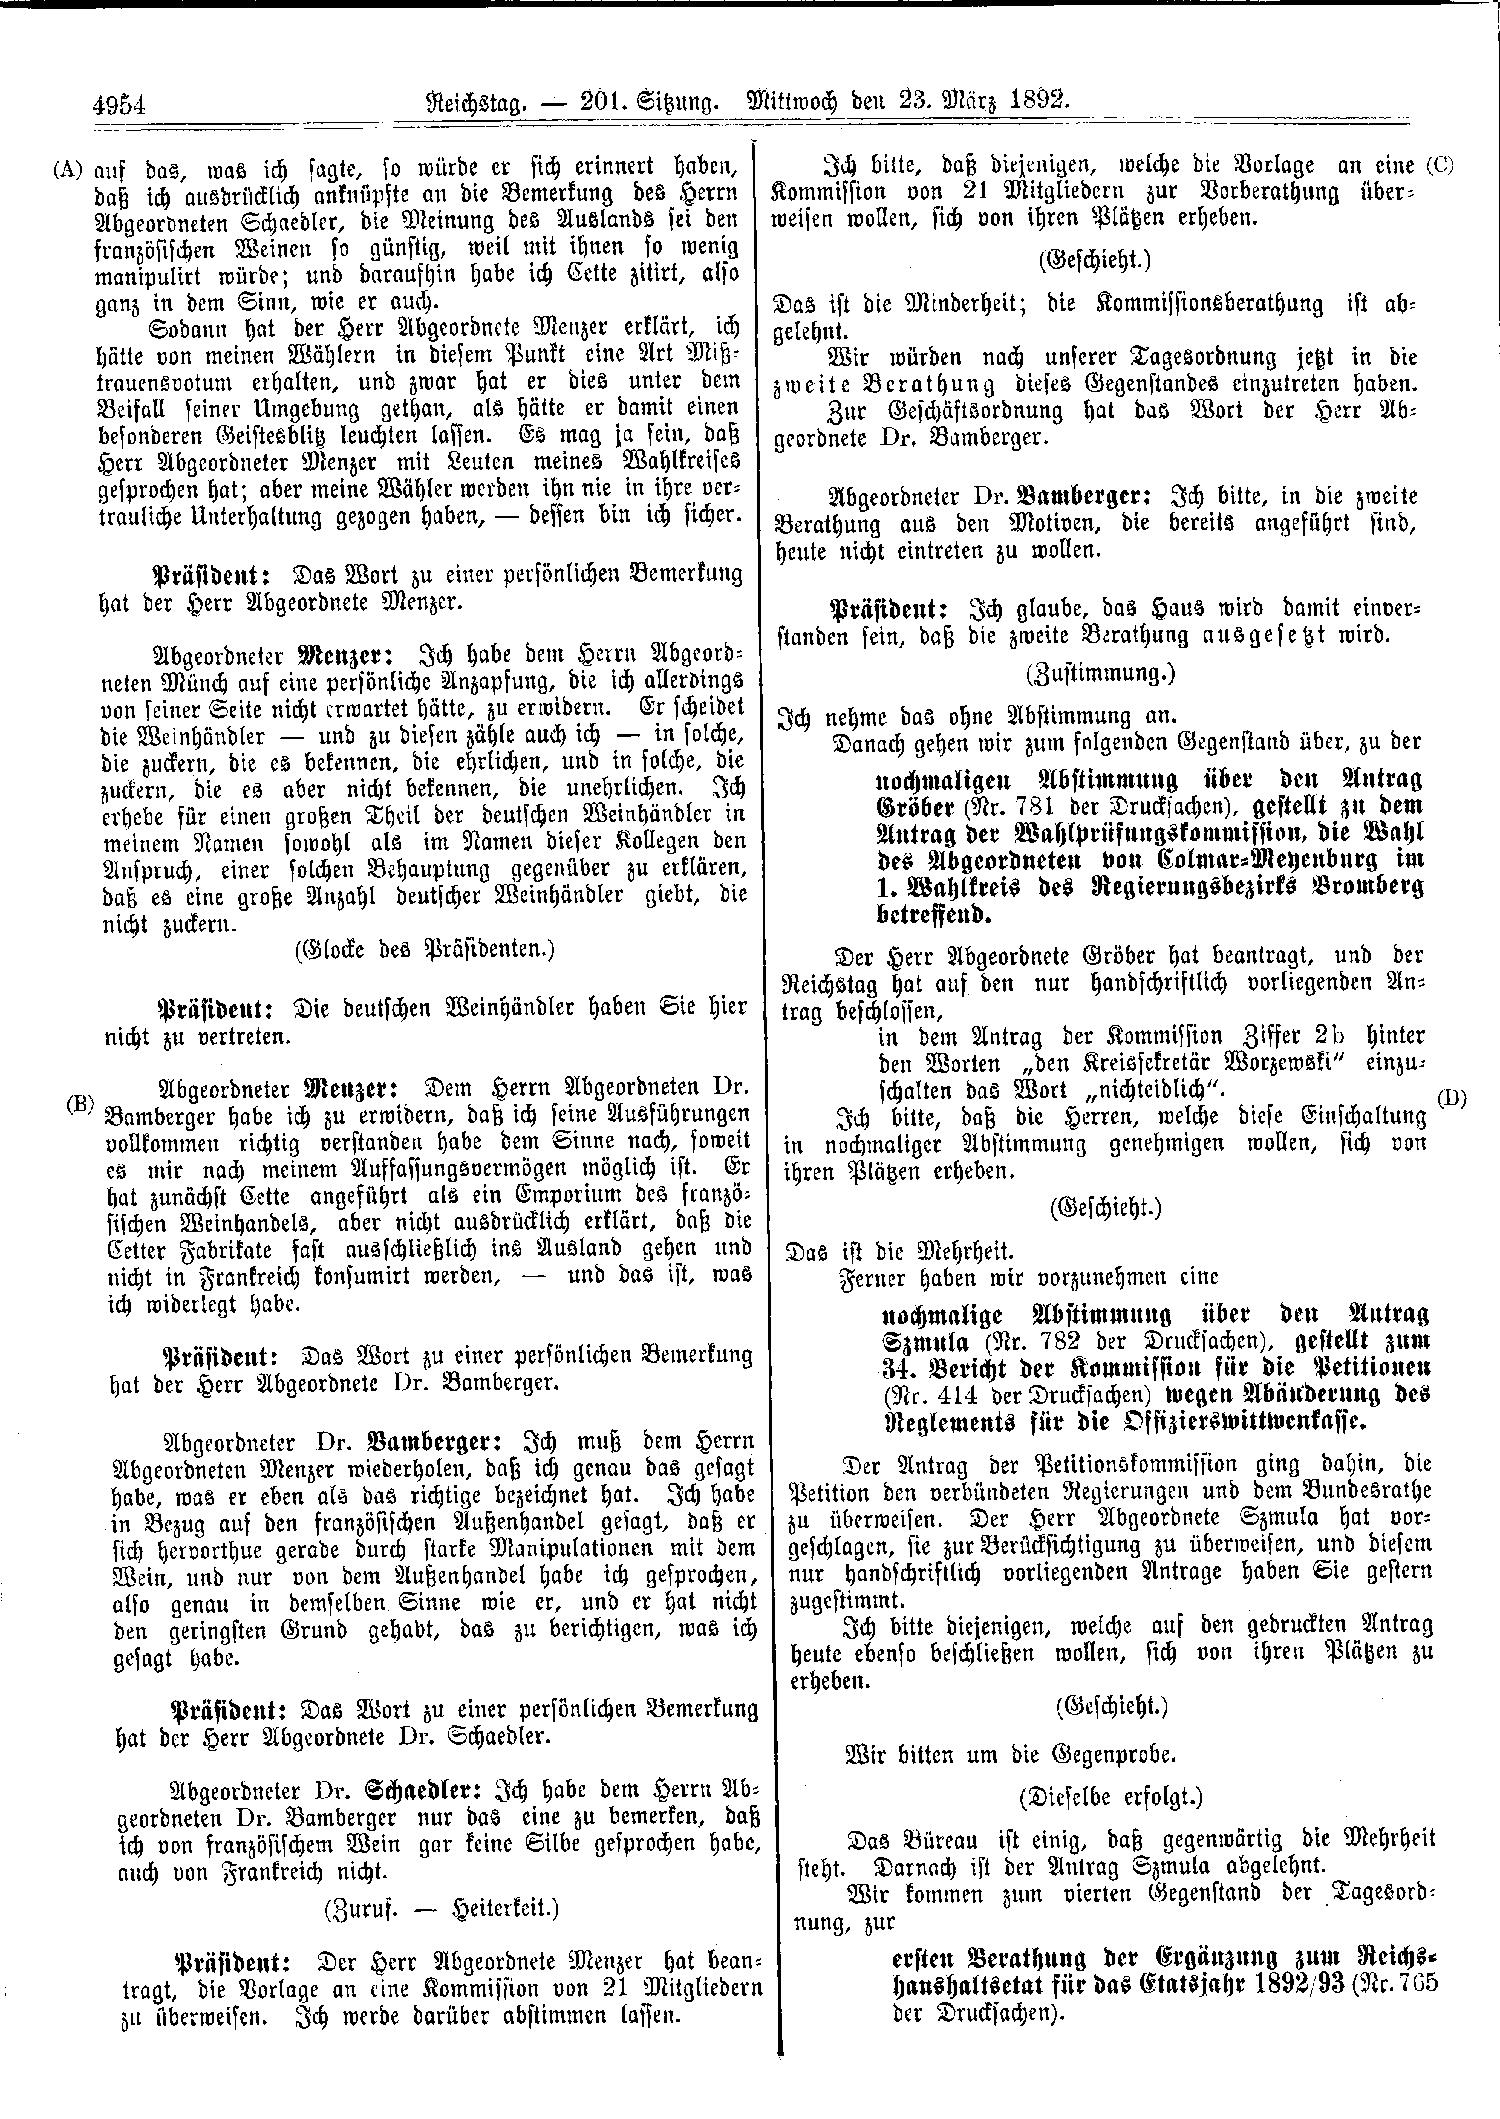 Scan of page 4954